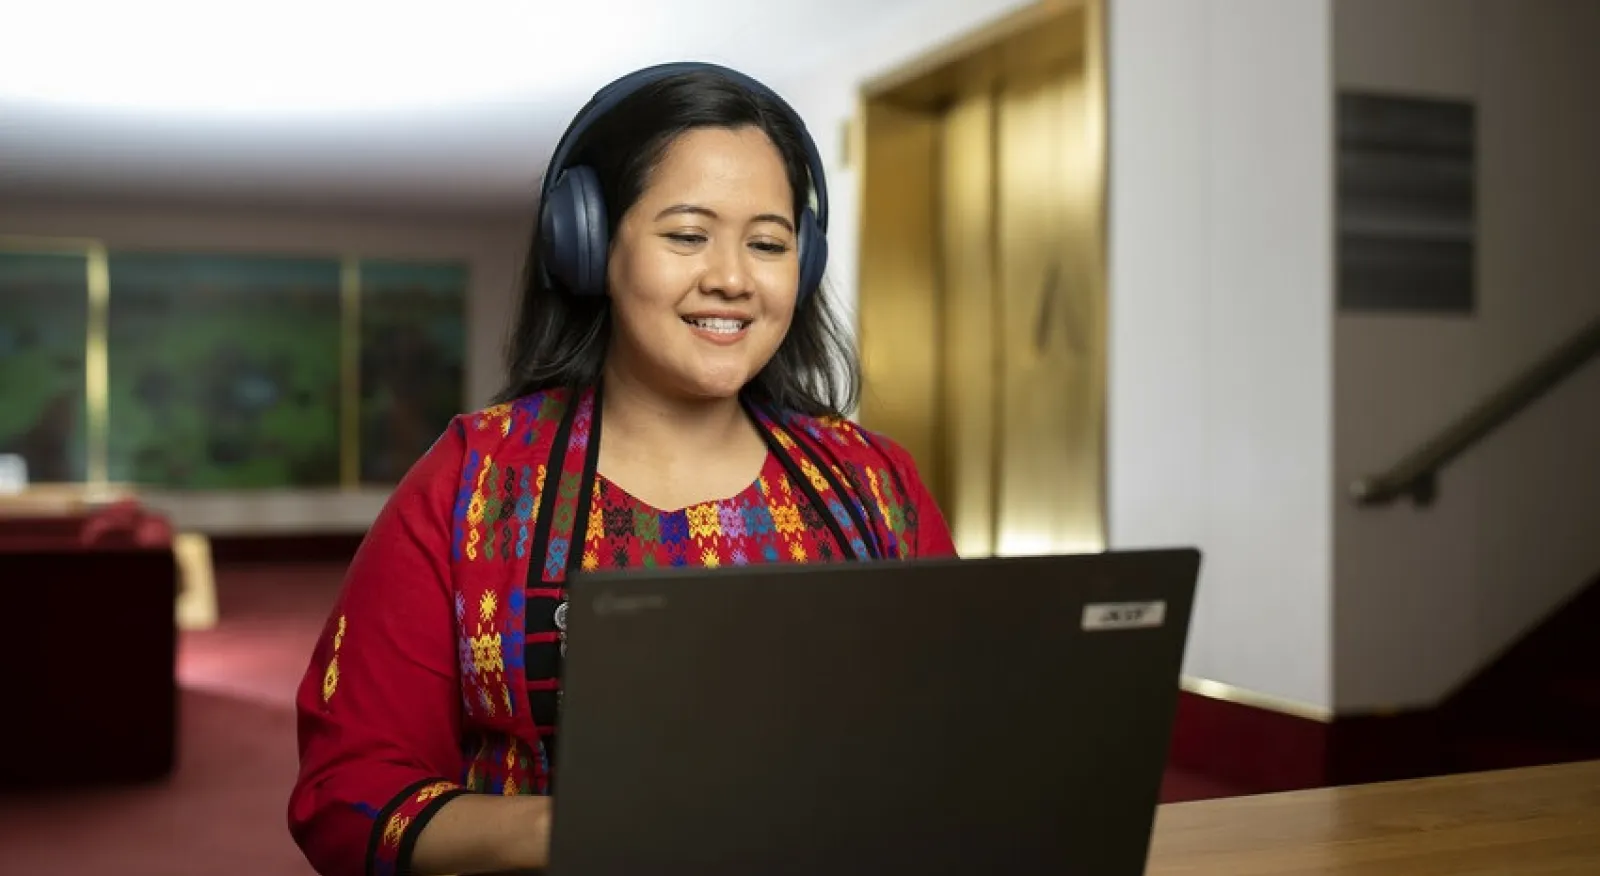 A lady in a red embroidered top sits inside, she is on a laptop and has headphones on